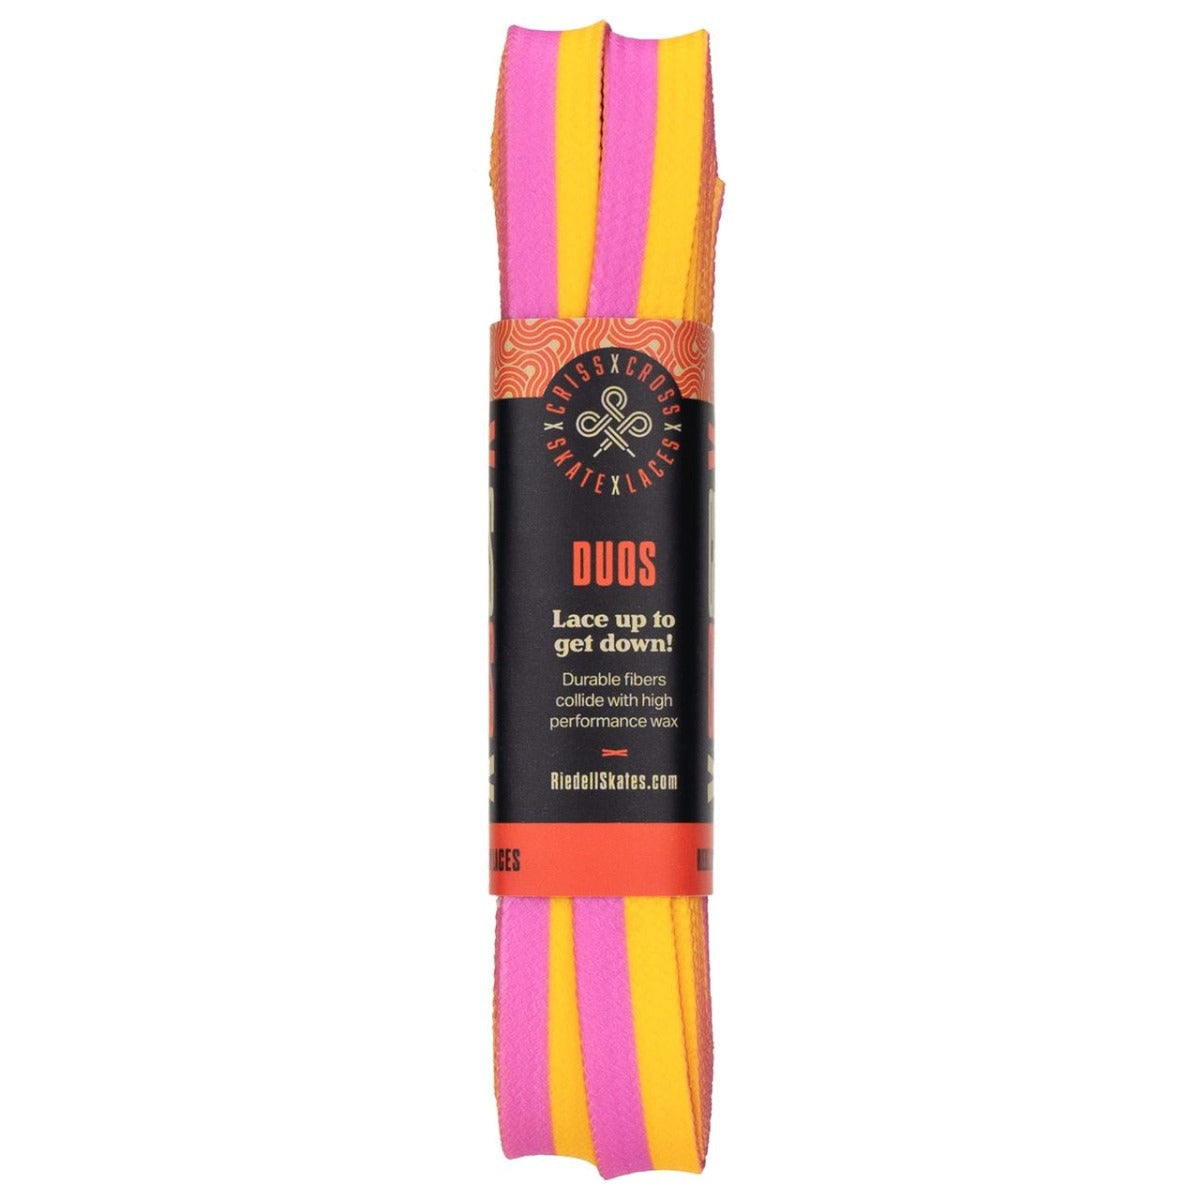 Criss Cross Duo Laces - Pink/Yellow